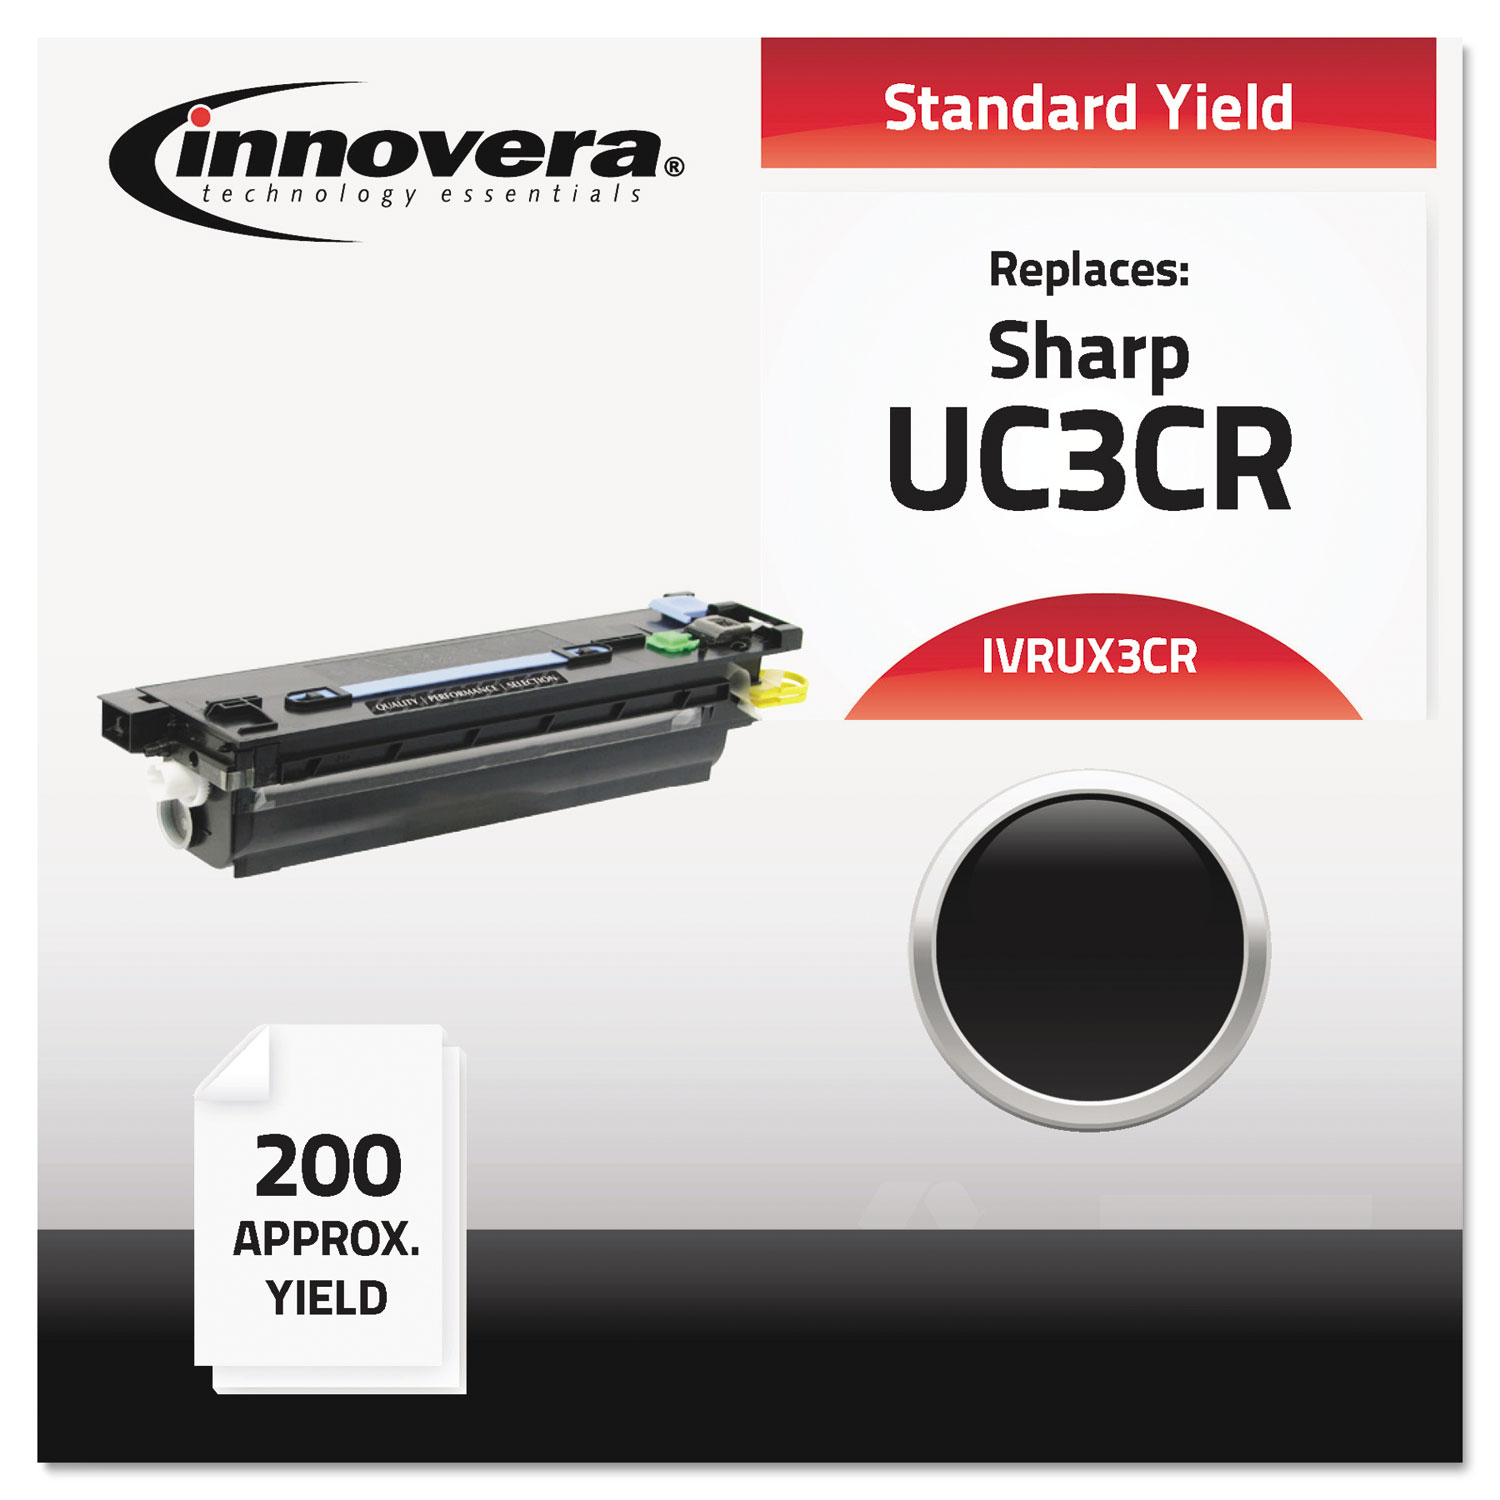  Innovera IVRUX3CR Compatible UX3CR (UX3CR) Thermal Transfer Print Cartridge, 100 Page-Yield, Black (IVRUX3CR) 